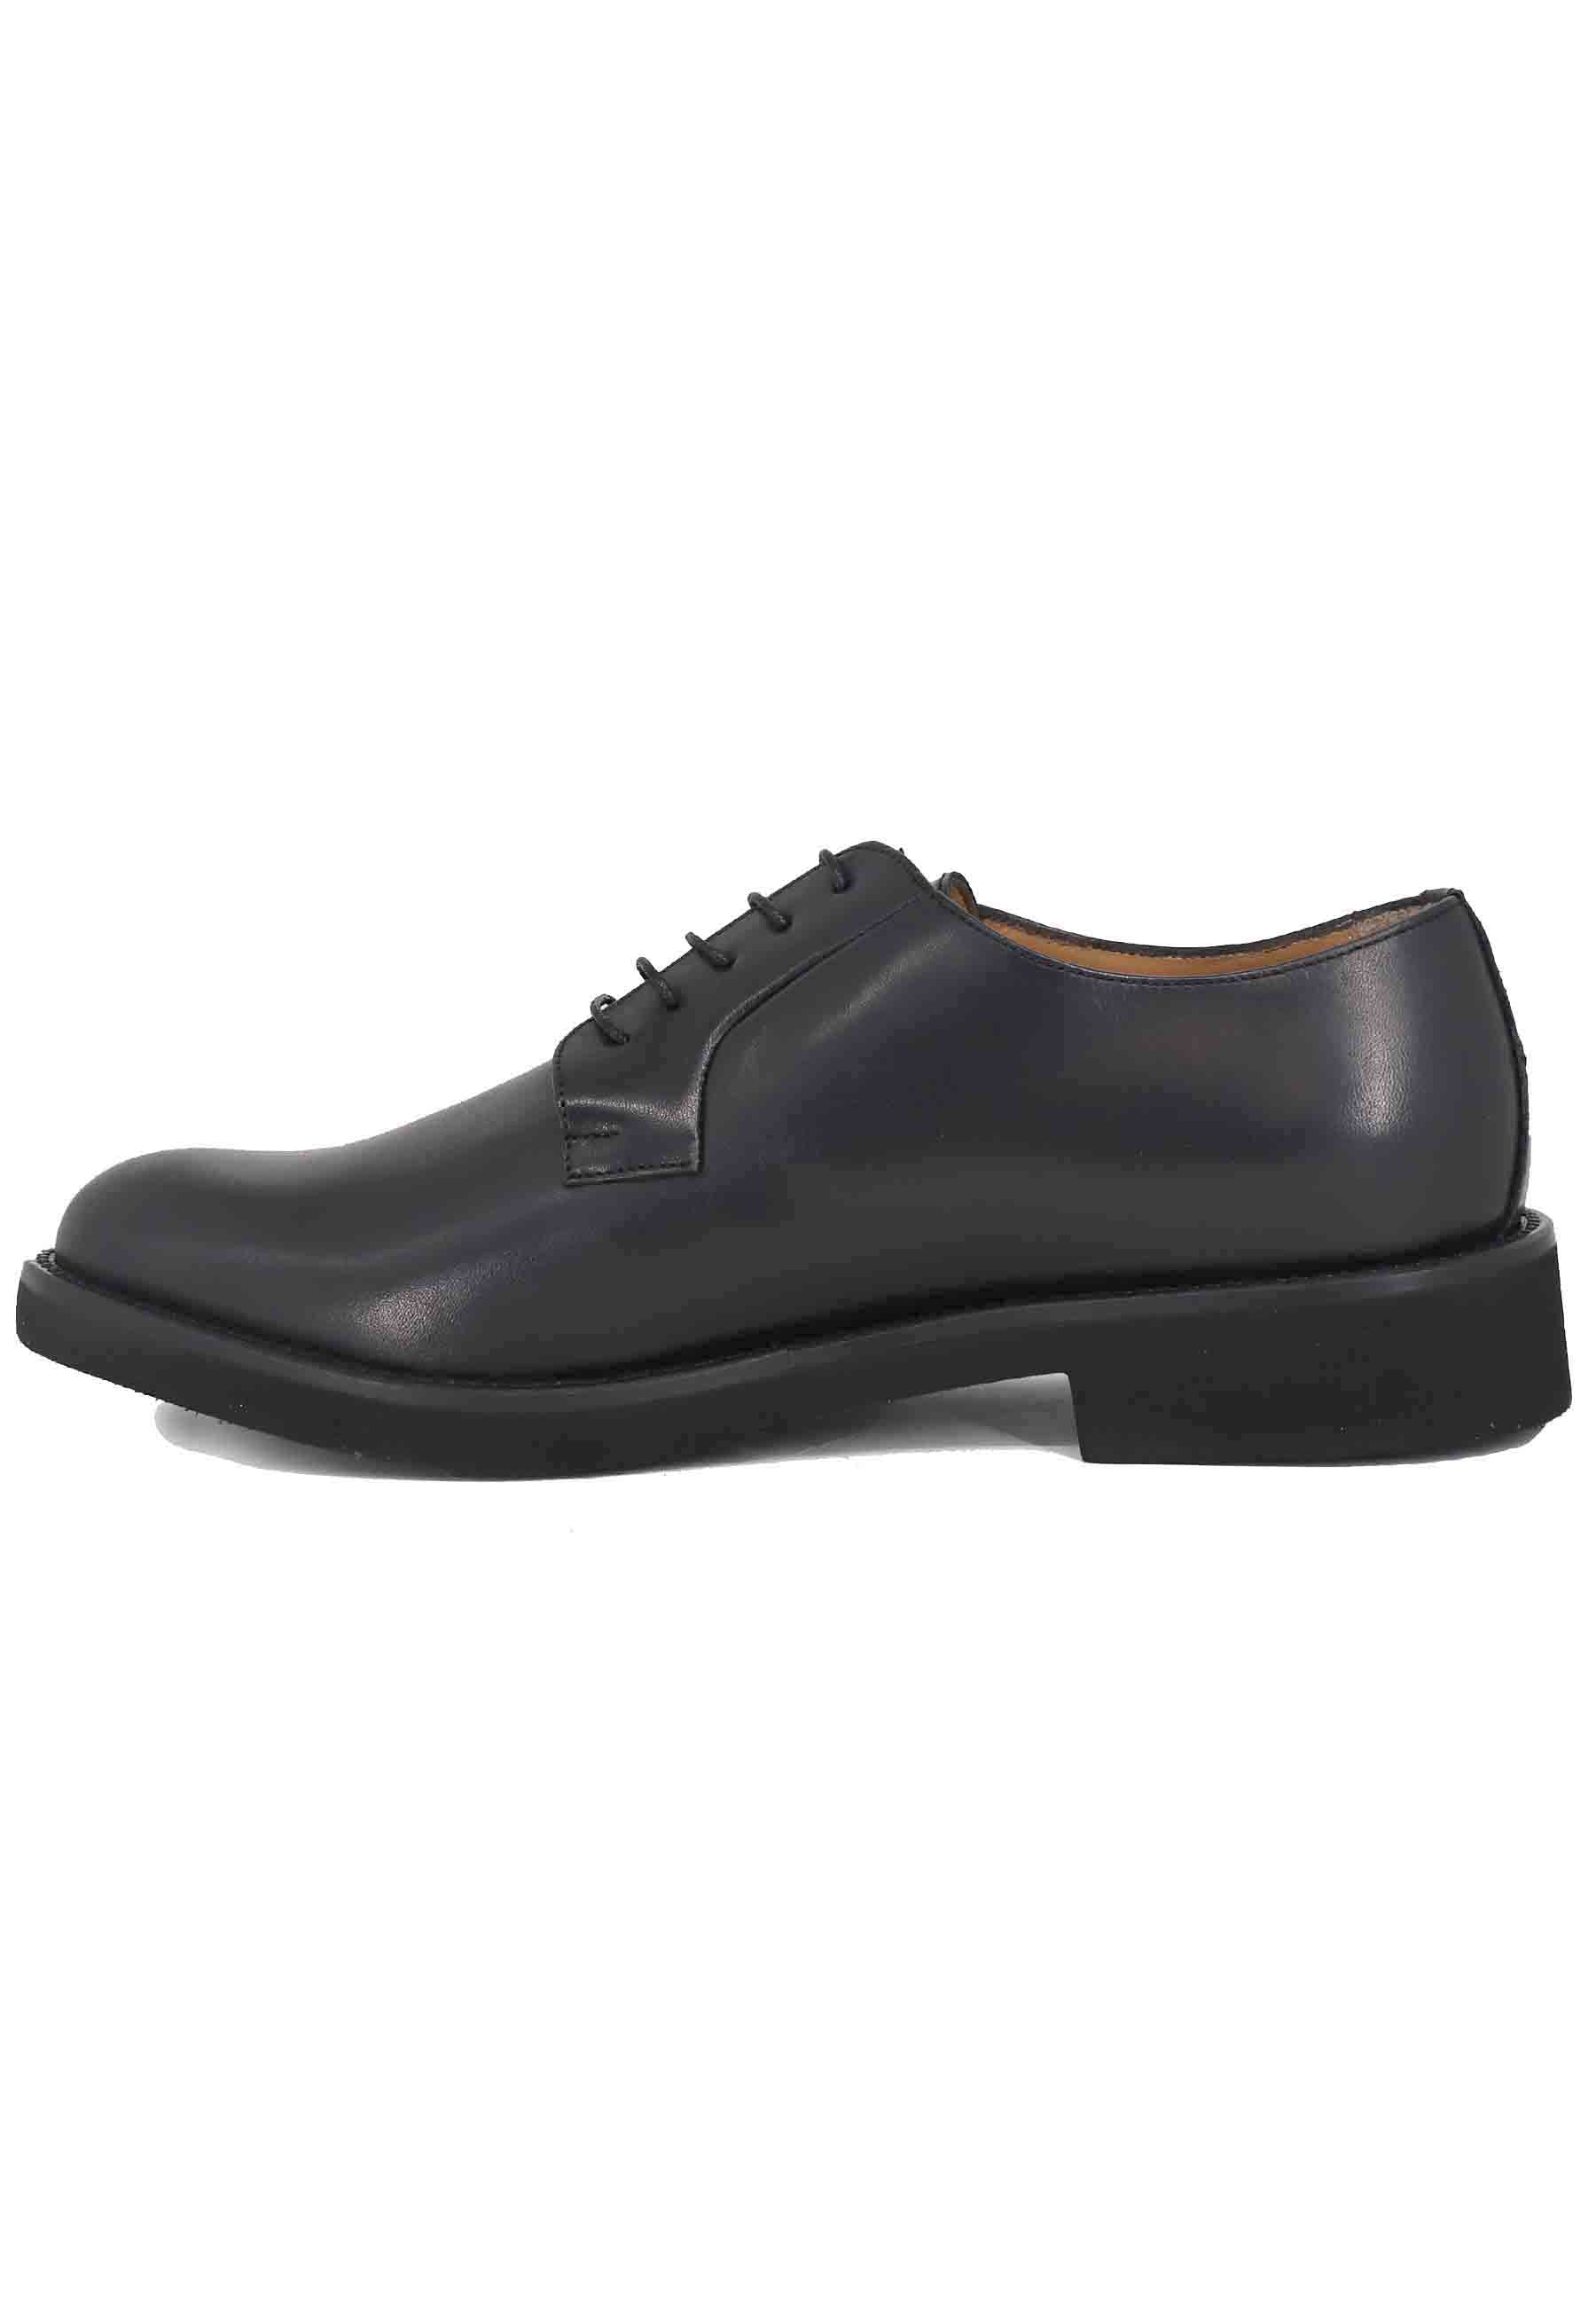 Men's black leather lace-ups with ultra-light rubber sole and round toe